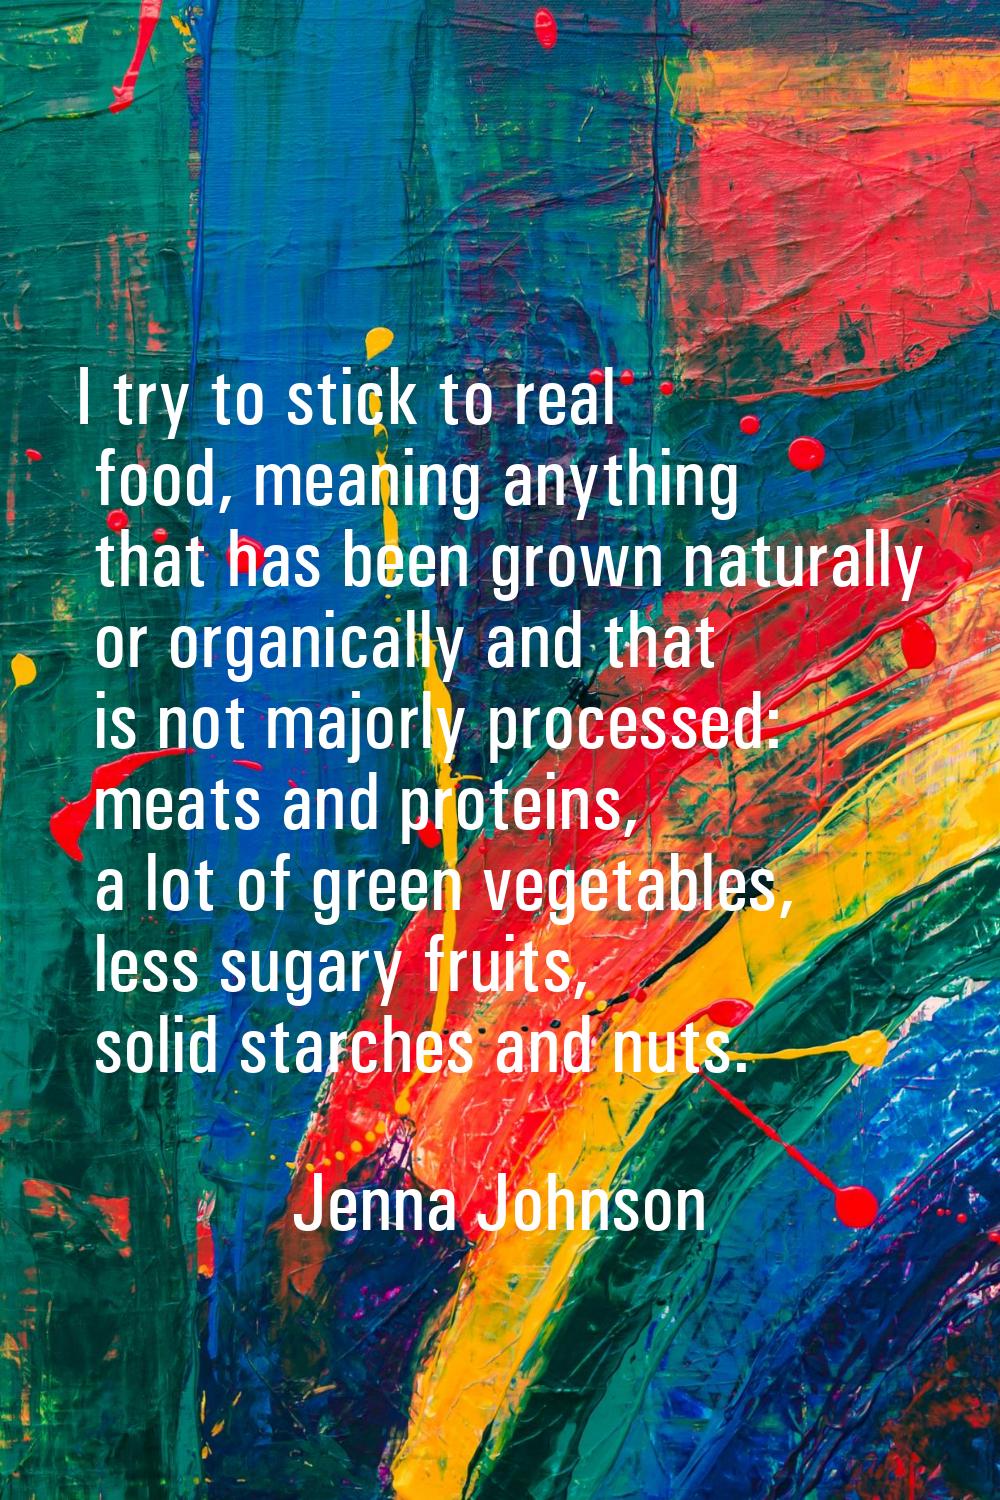 I try to stick to real food, meaning anything that has been grown naturally or organically and that